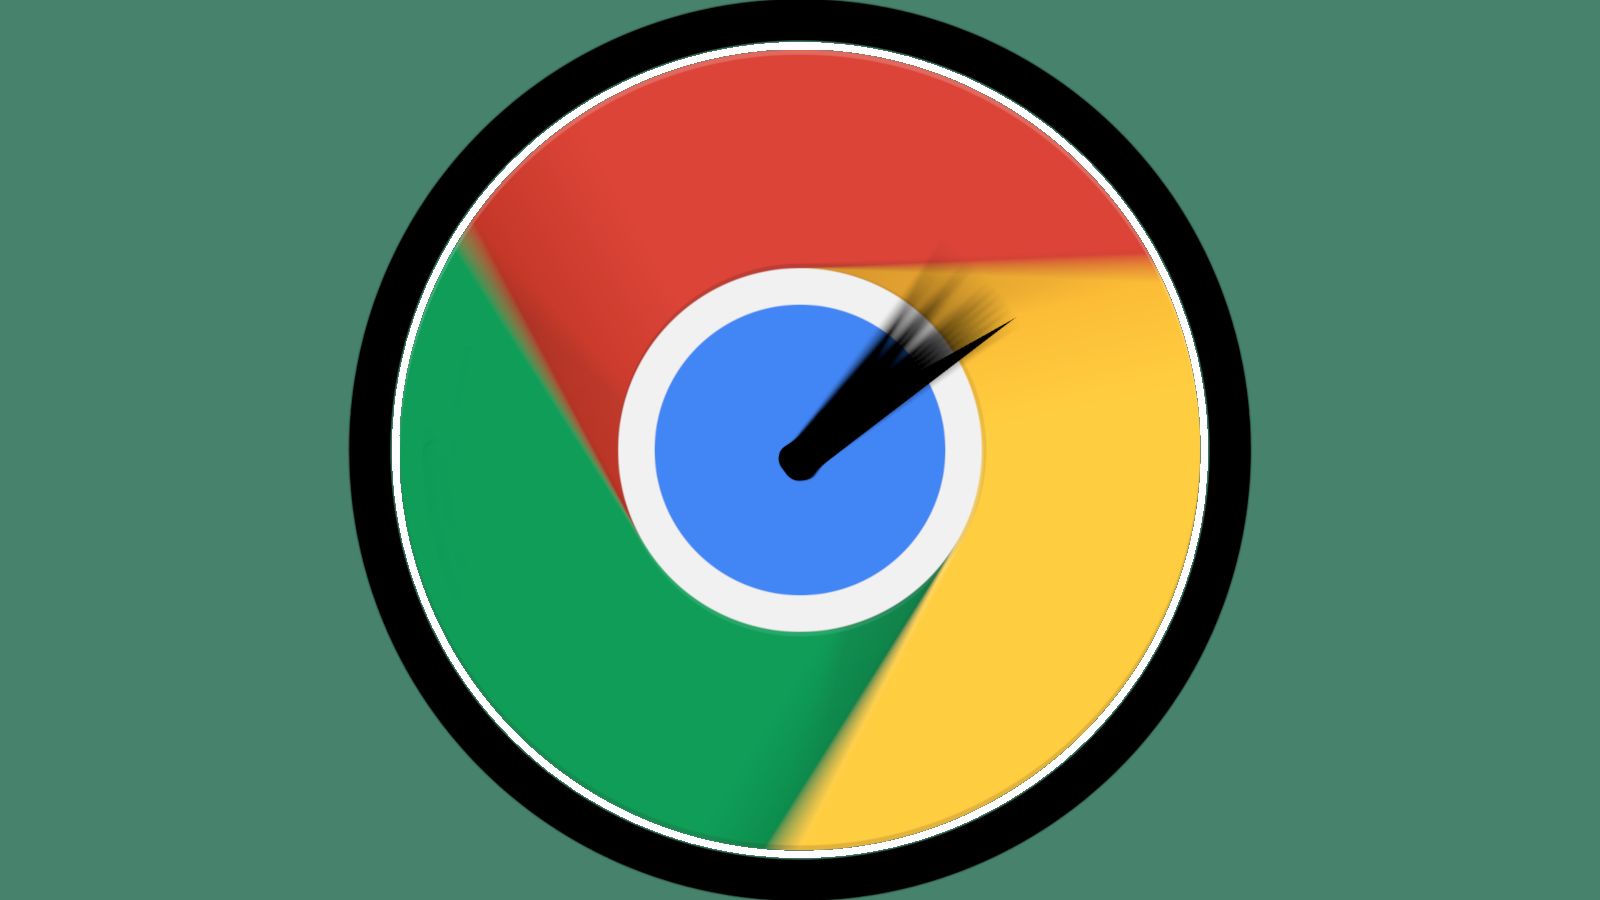 Google Chrome See 6 to free up browser RAM